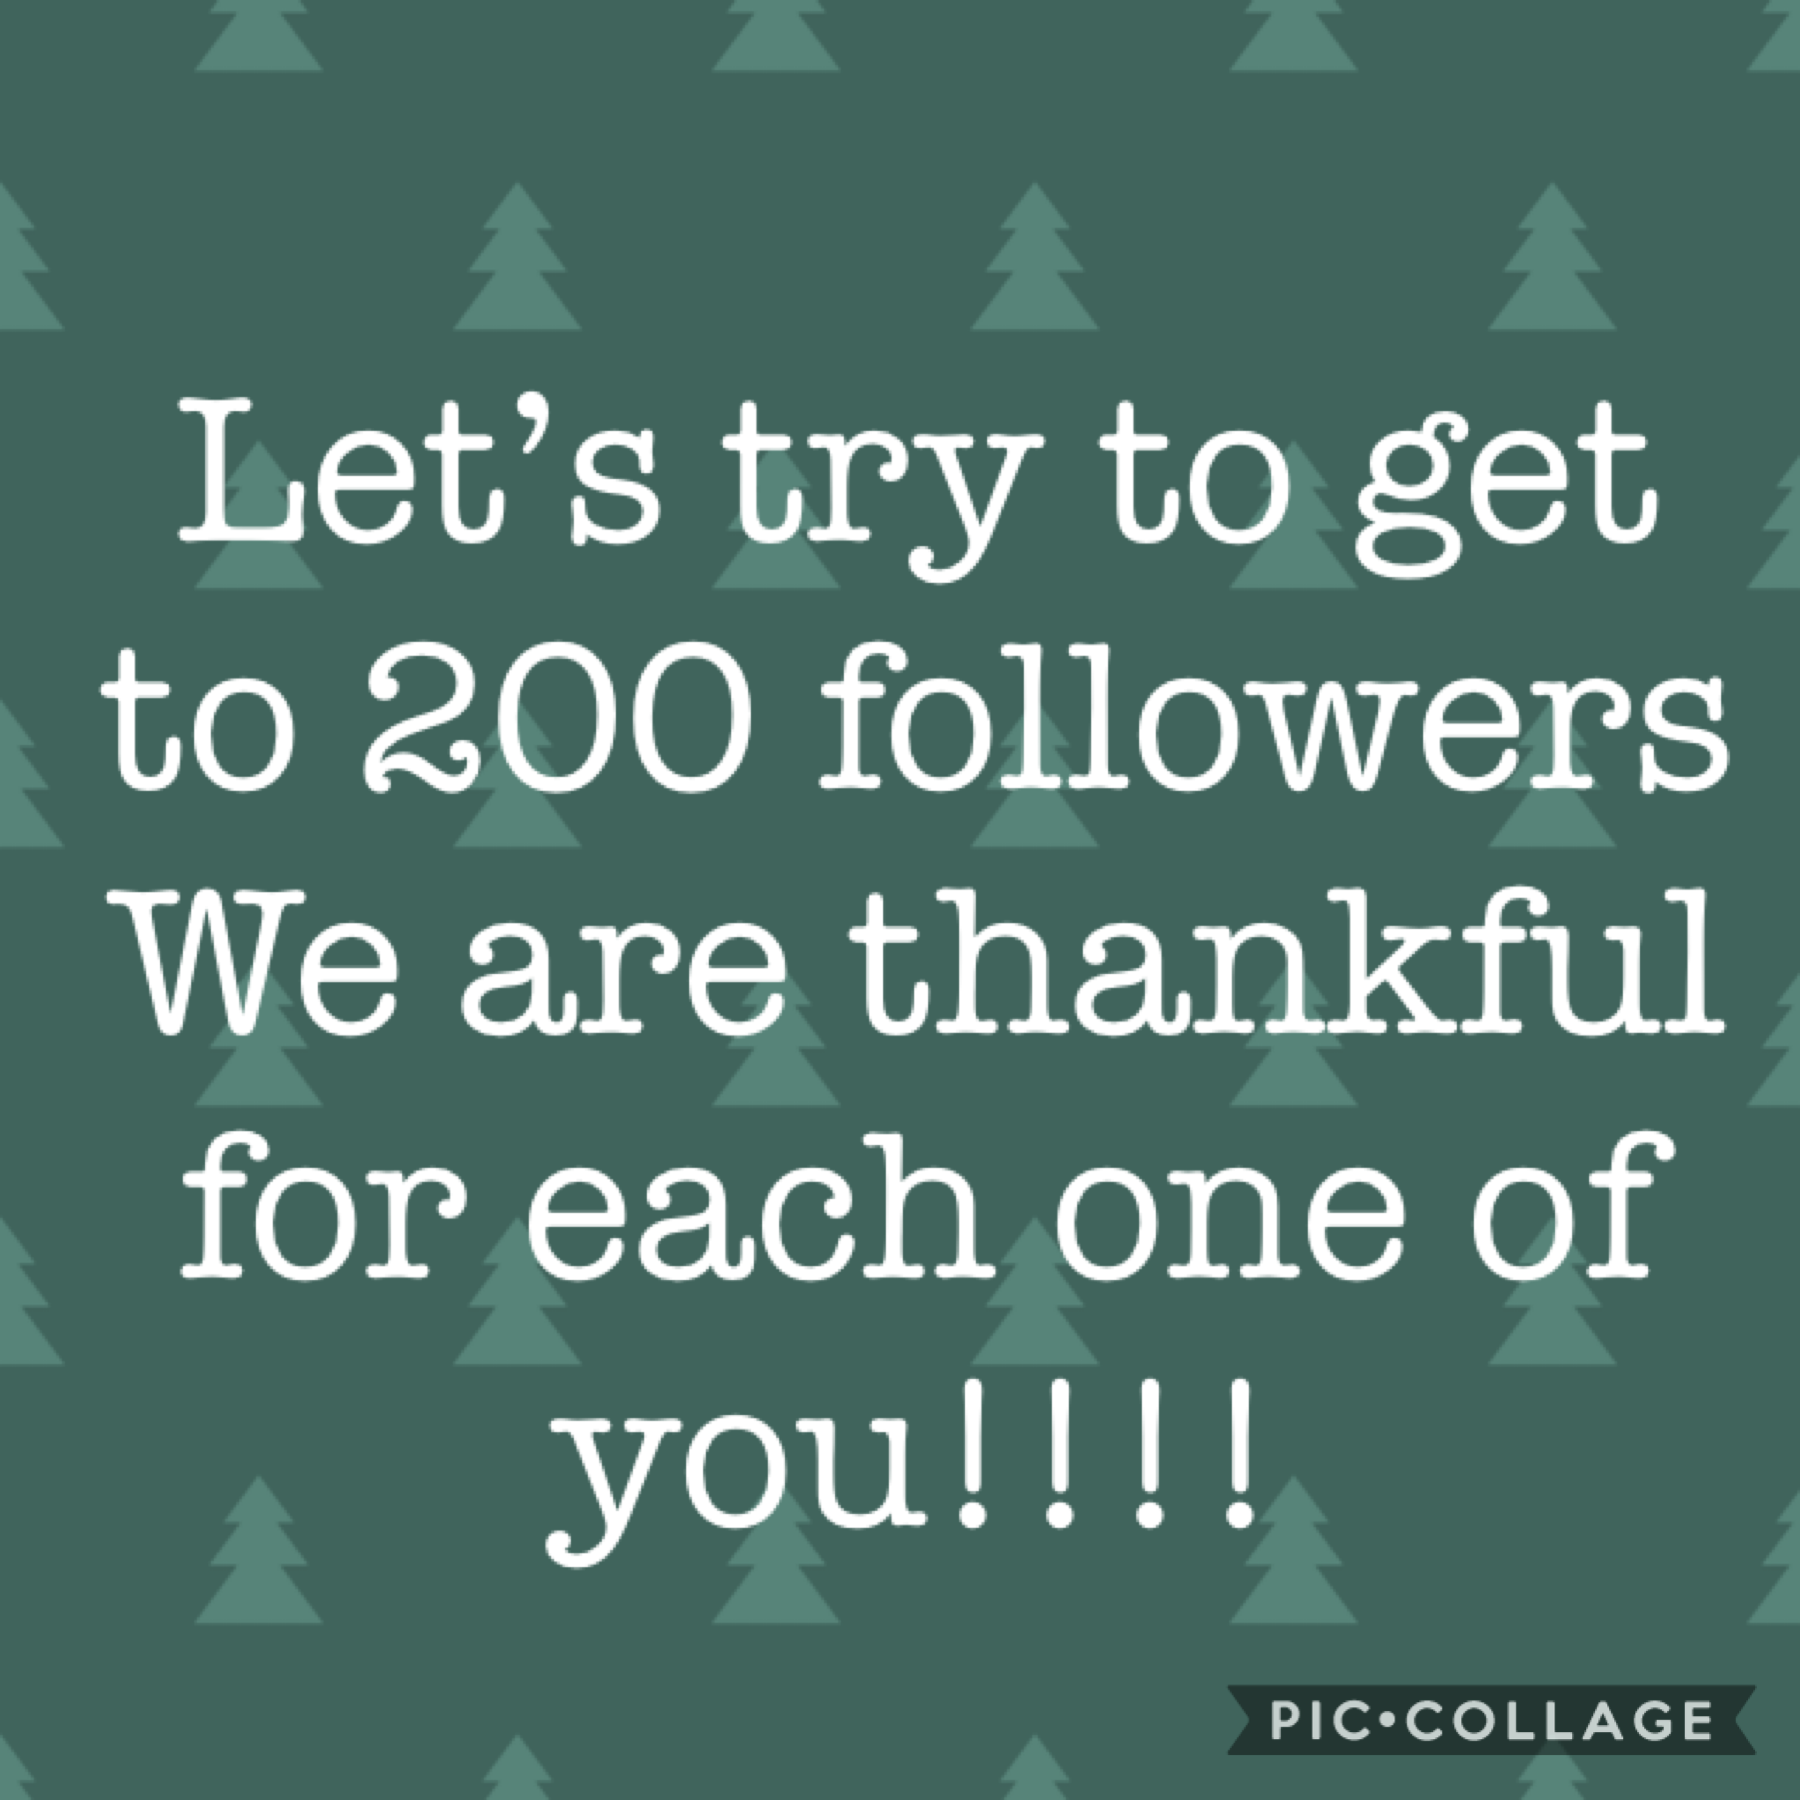 Thank you for 164 followers!! Share is with your friends and family so we can get to 200 by the end of the year. And bonus we are going to do more shoutouts